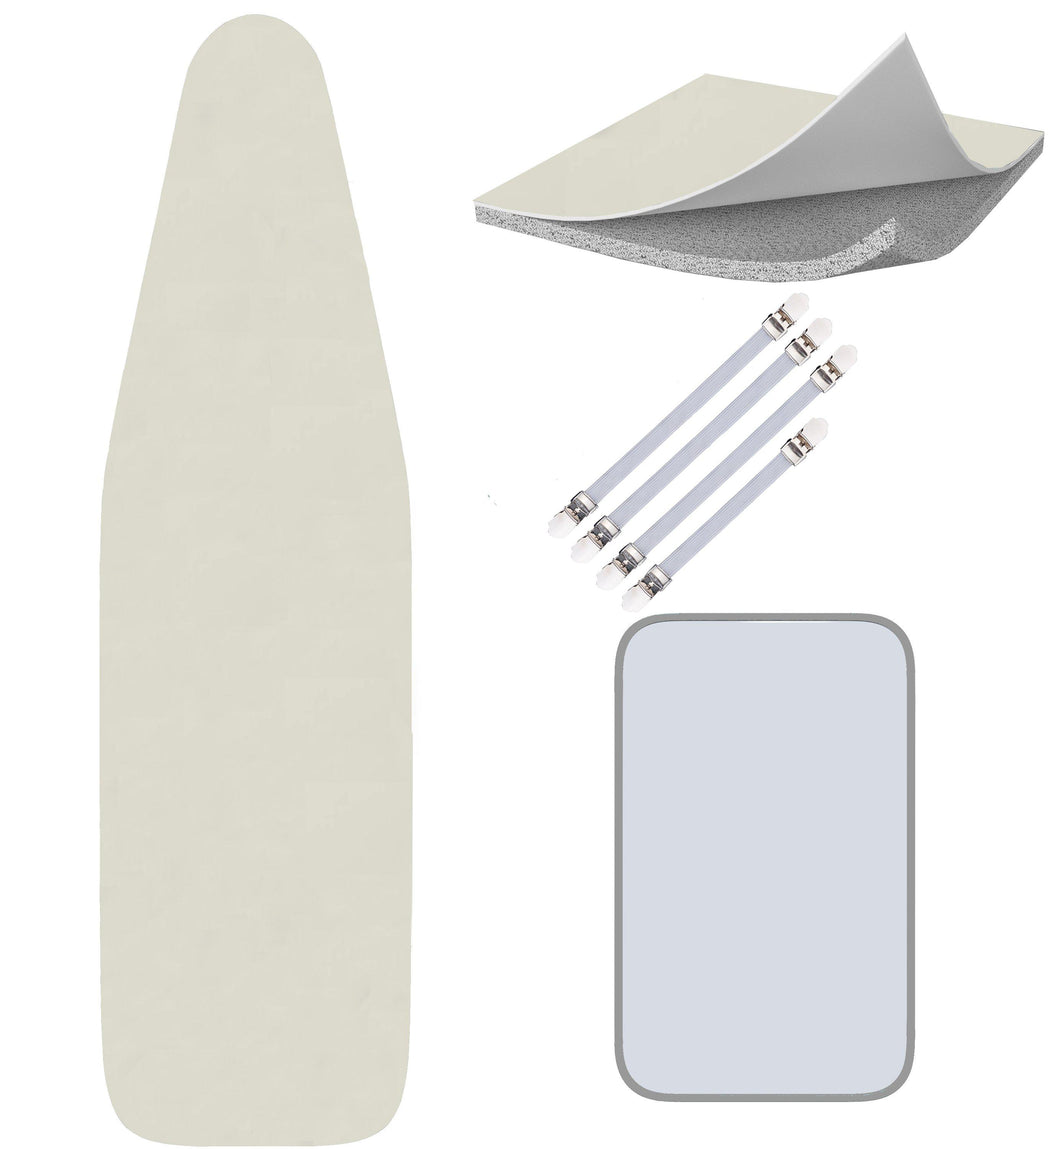 Ironing Board Cover - Scorch Proof with Bonus Adjustable Fasteners and Protective Mesh (15